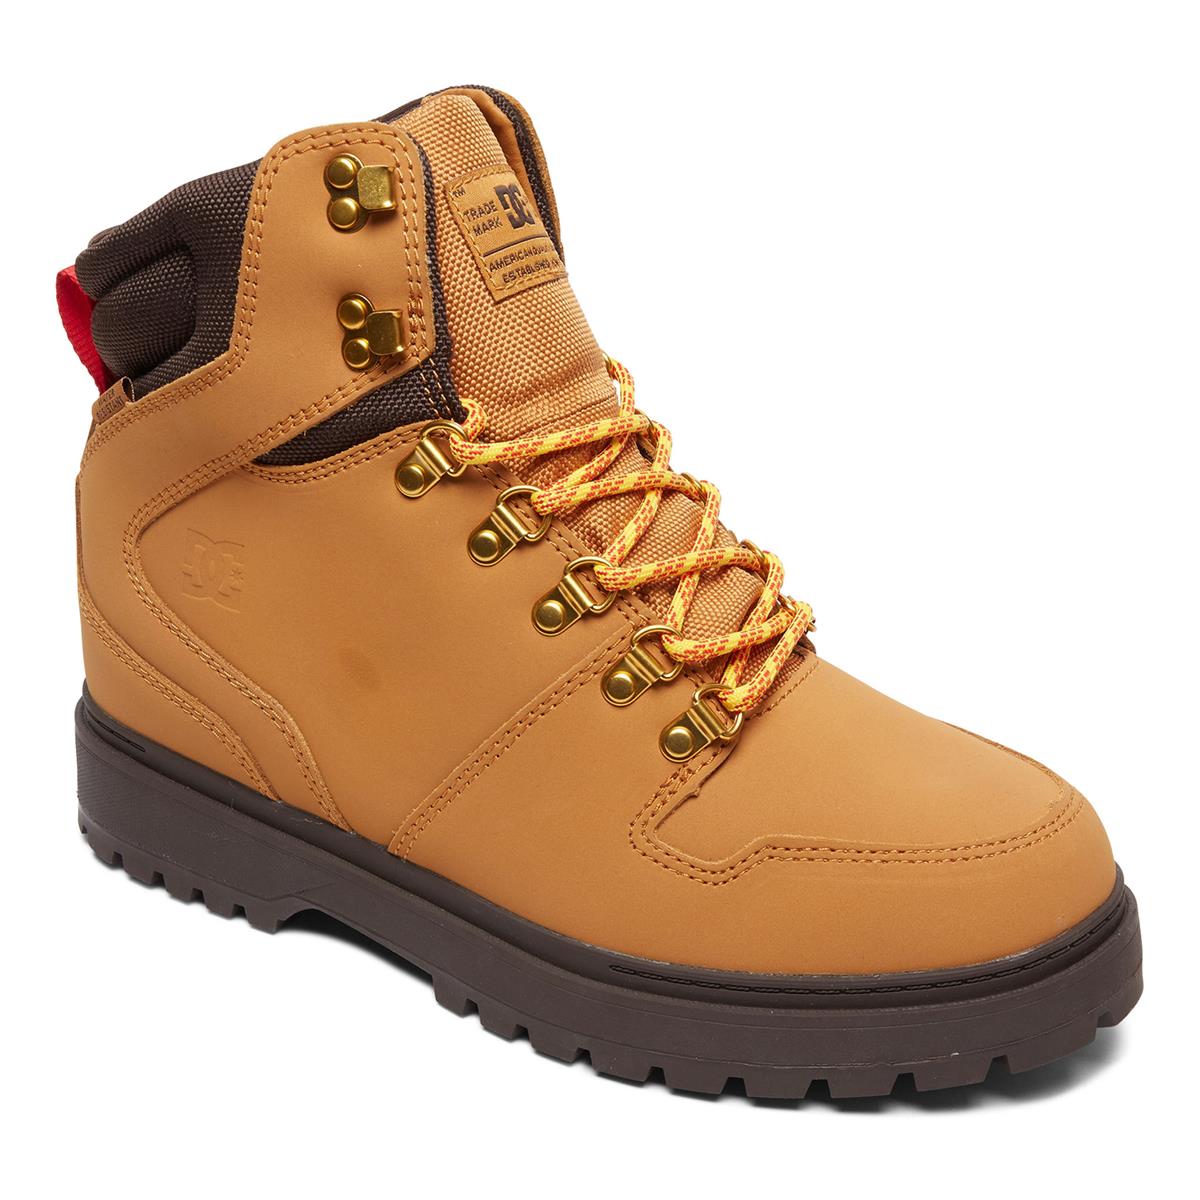 DC Winter Shoes Peary TR Wheat/Dark Chocolate